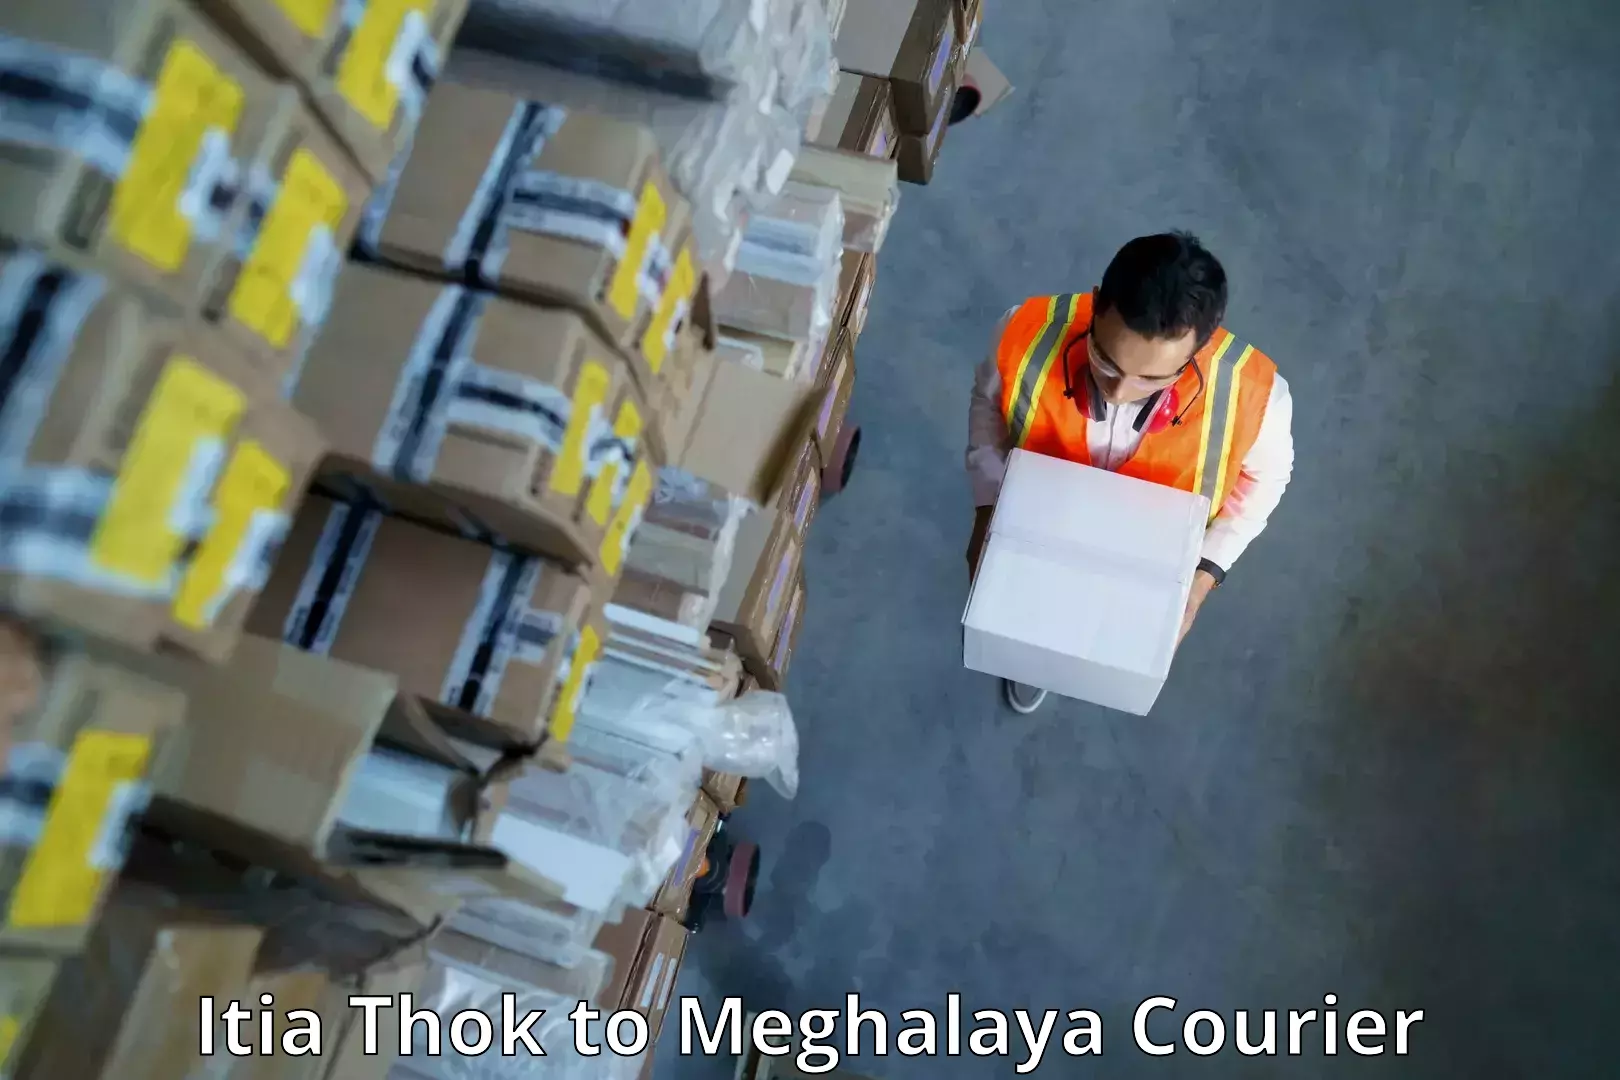 Express delivery solutions Itia Thok to Meghalaya